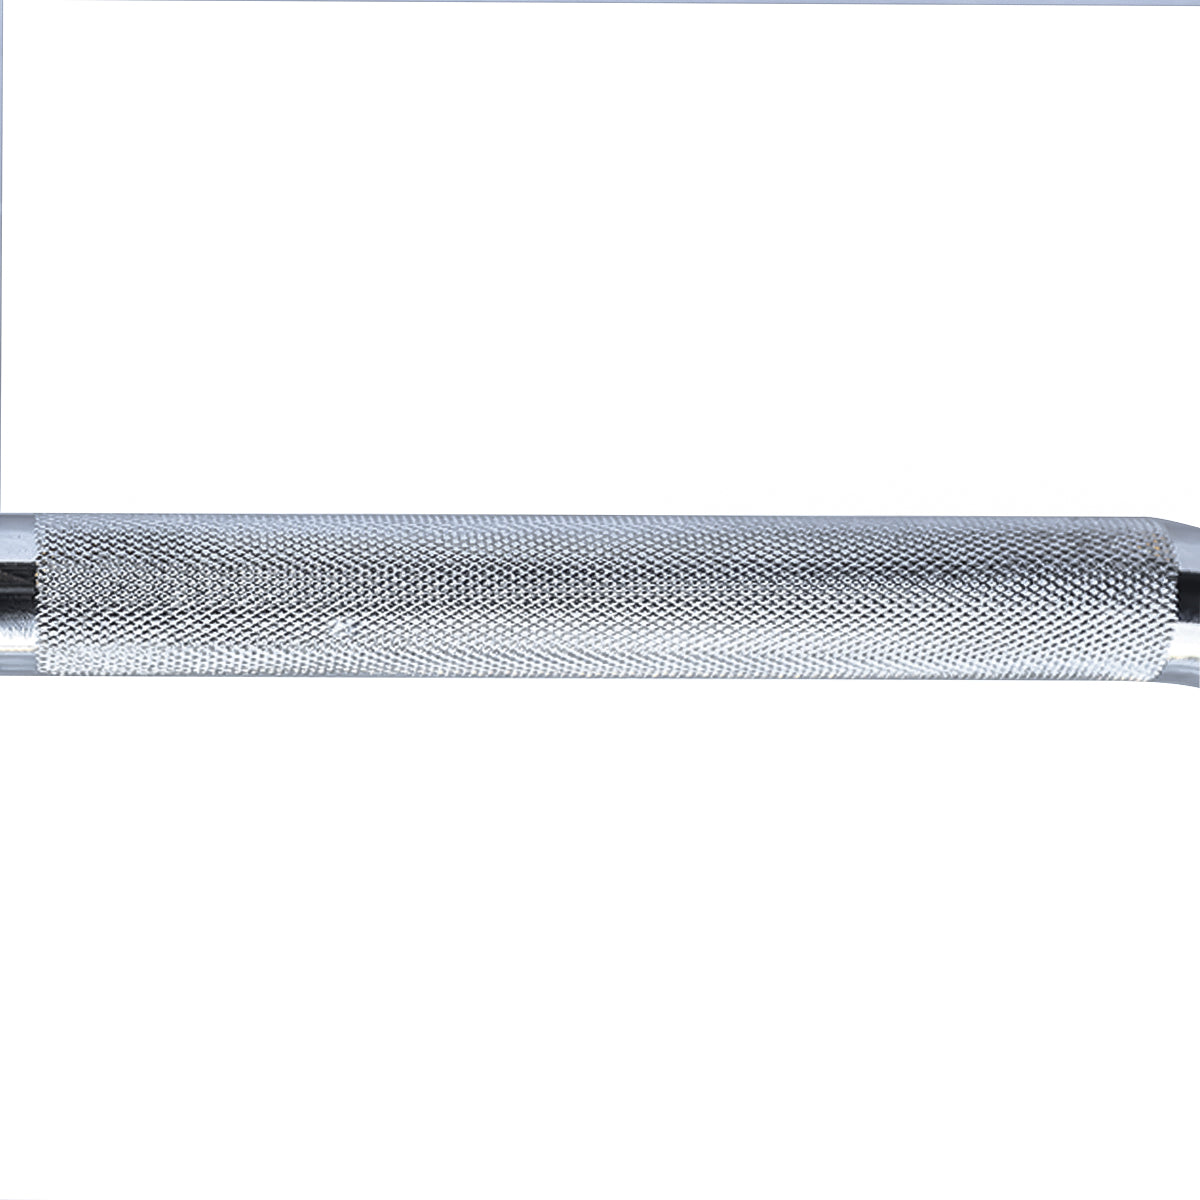 2.2m Safety Squat Barbell knurling